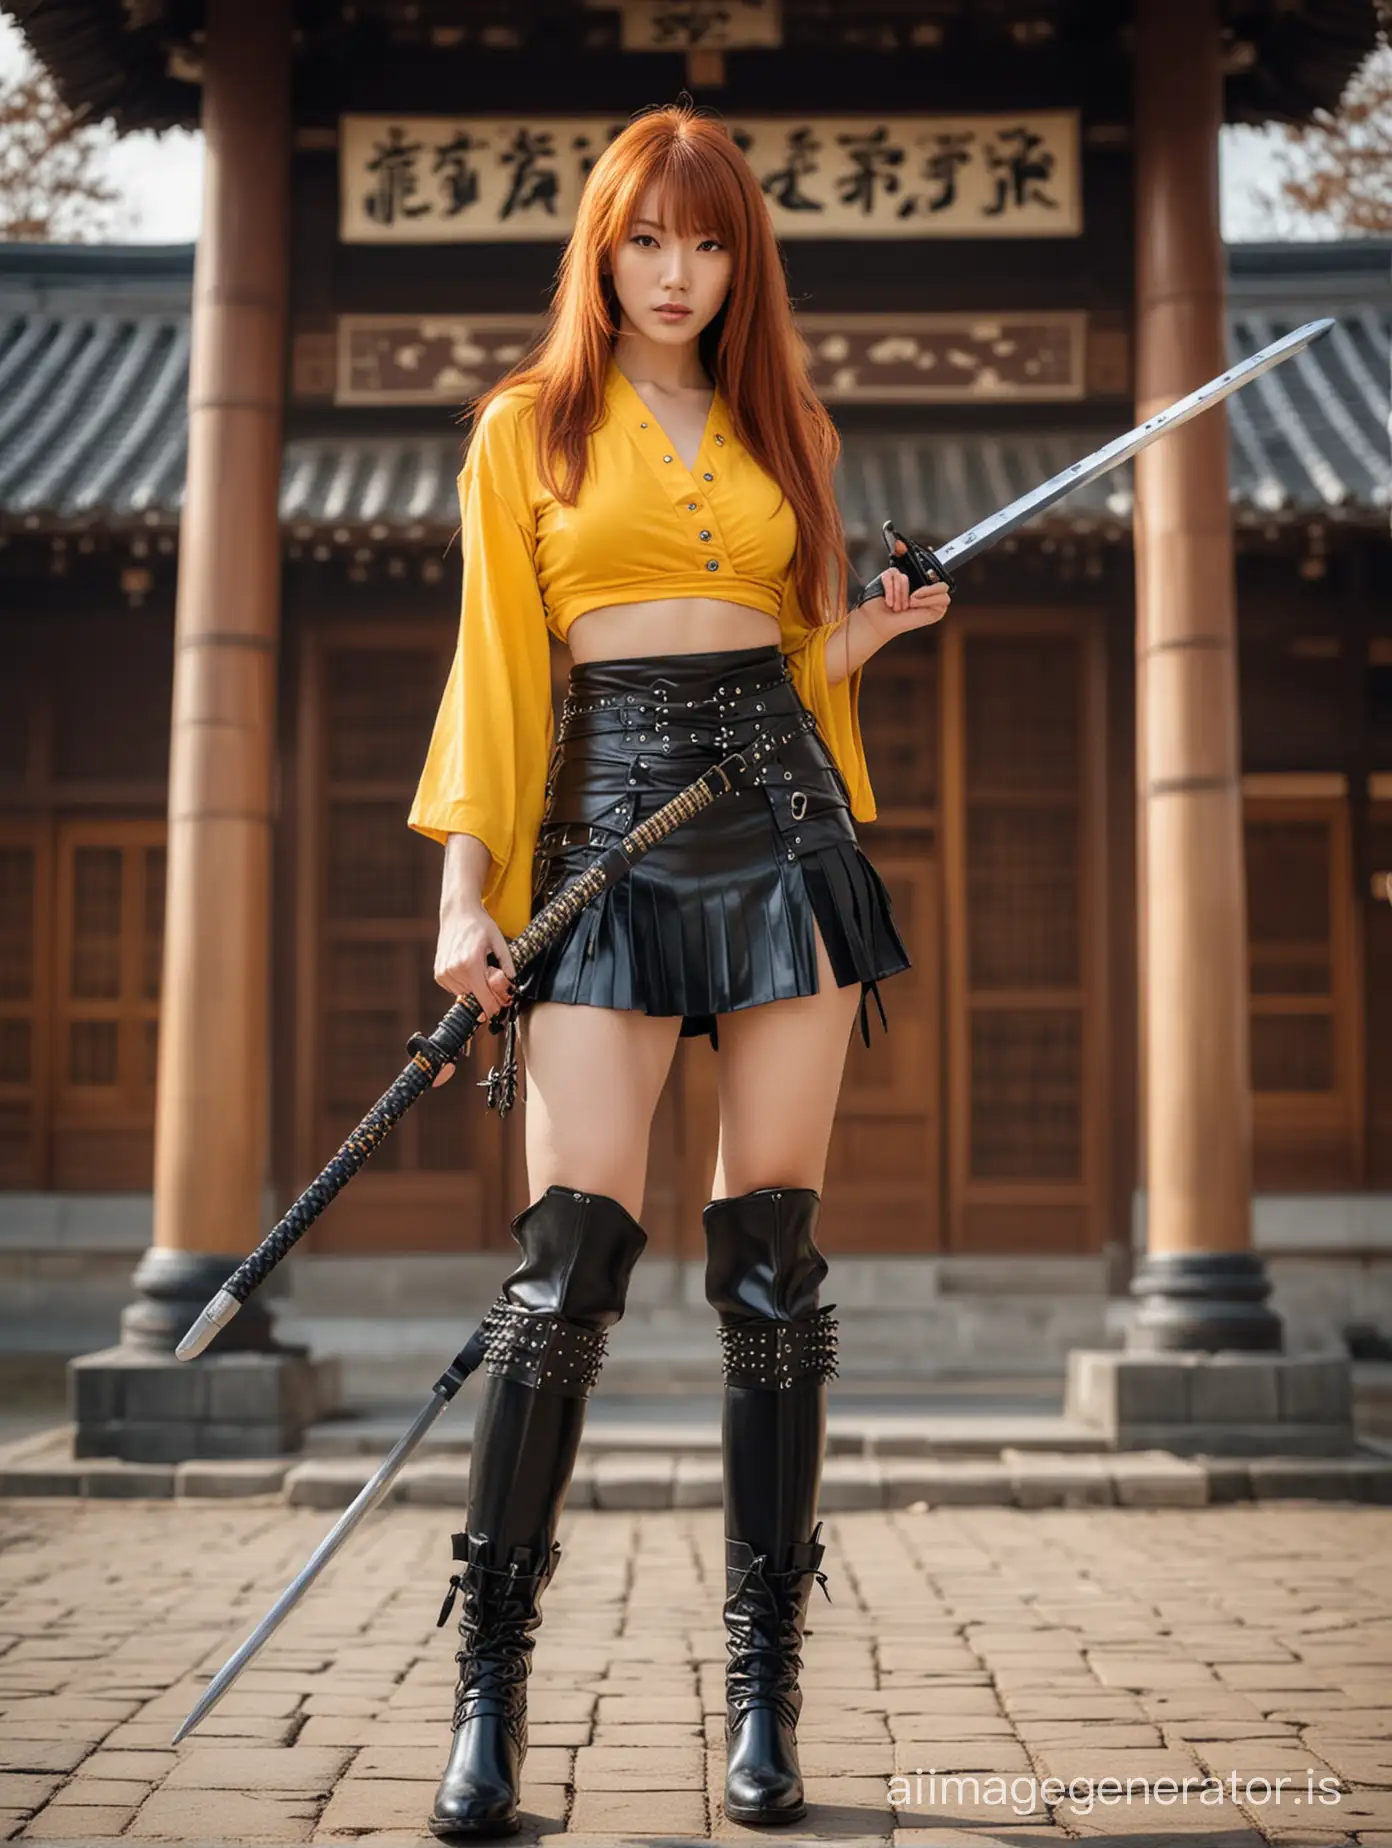 Kill Bill style. sexy woman with samurai sword. very long red hair Japanese hairstyle. yellow blouse. black miniskirt. high black boots. full body leather armor with spikes. Japanese temple background